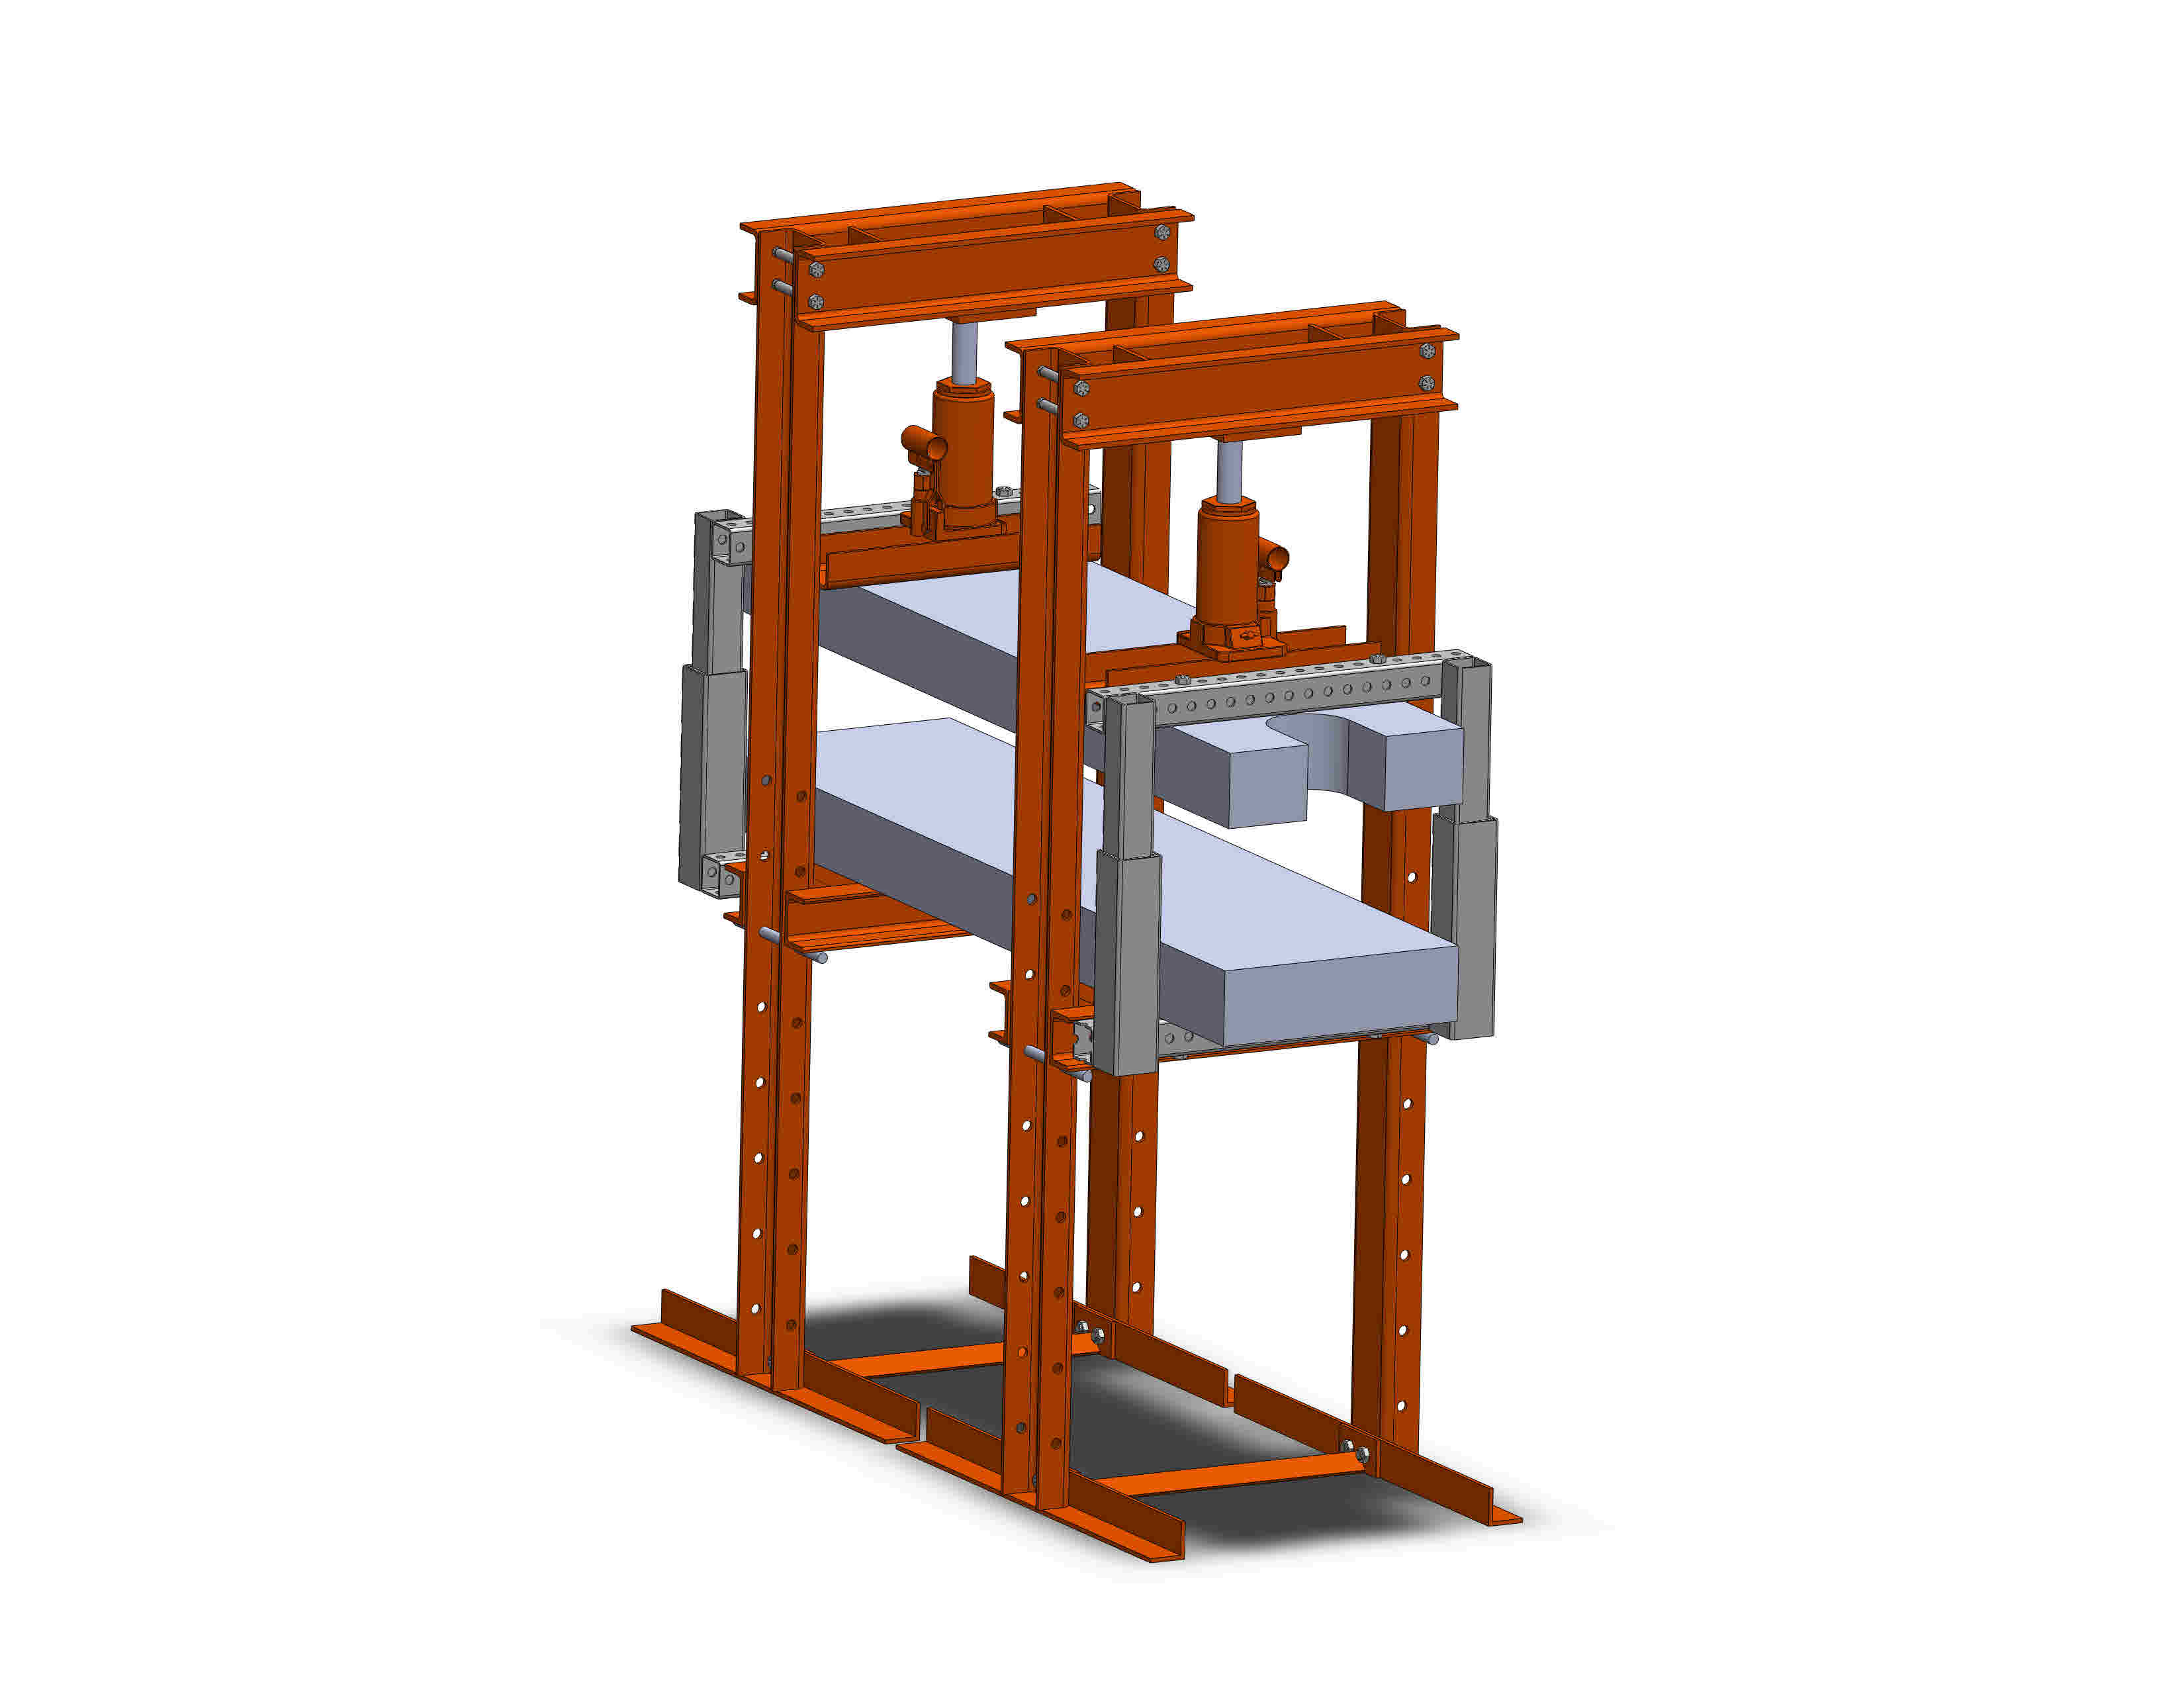 SolidWorks model of a complete presses and alignment system